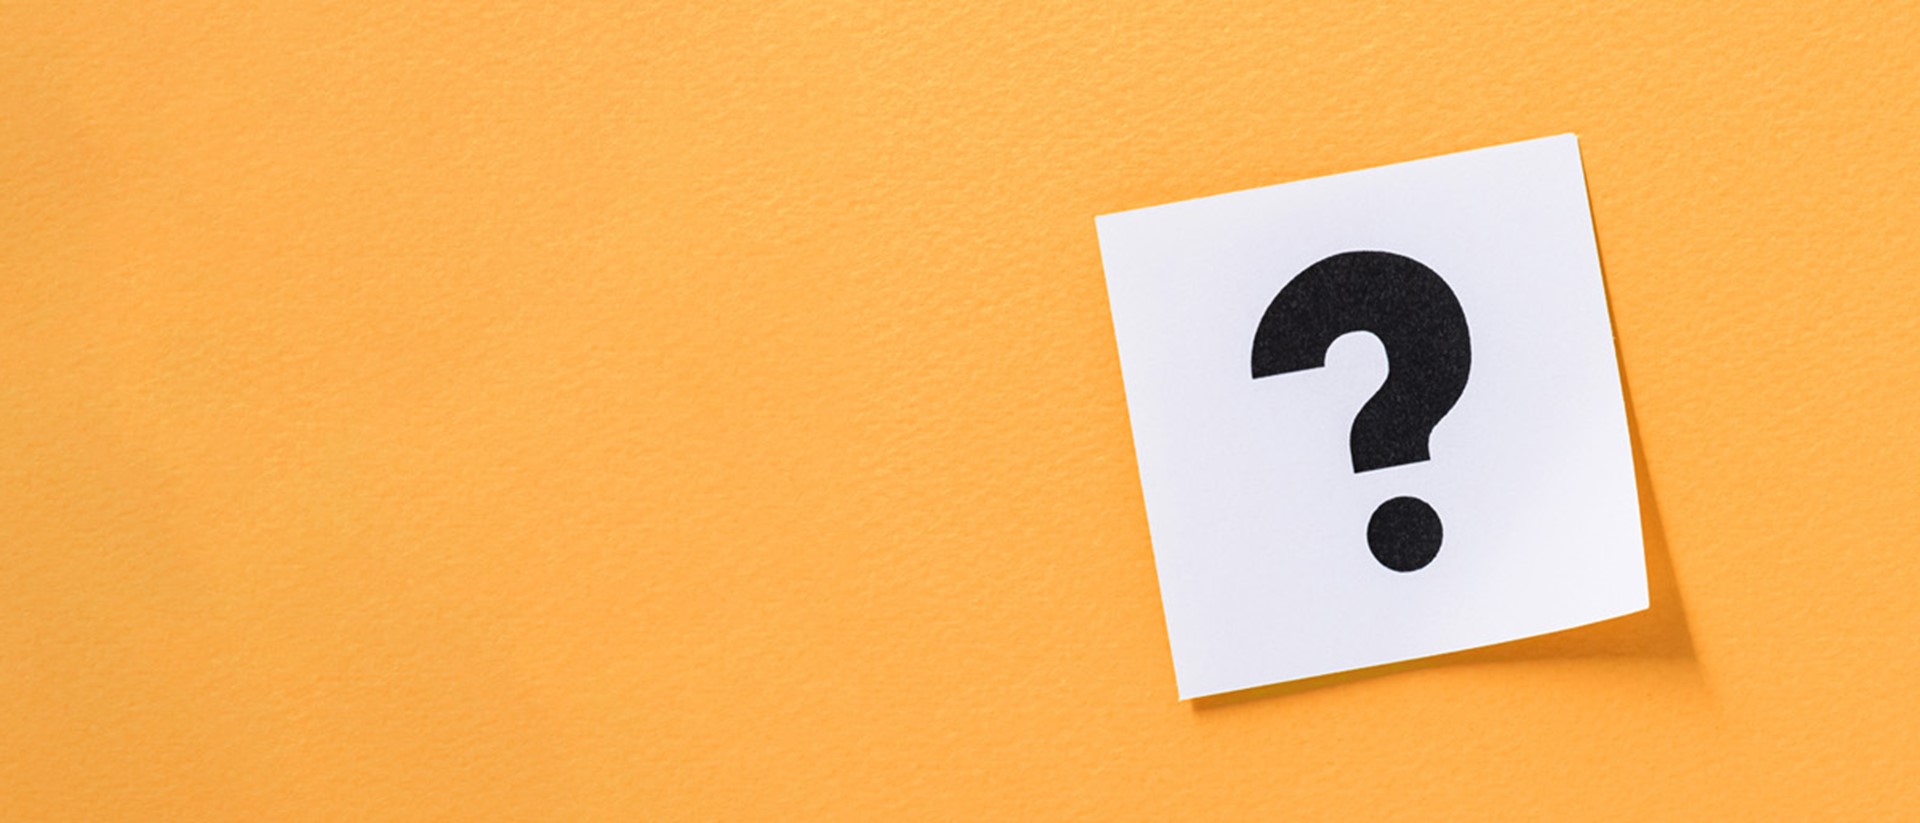 A question mark on a white sticky note against an orange background